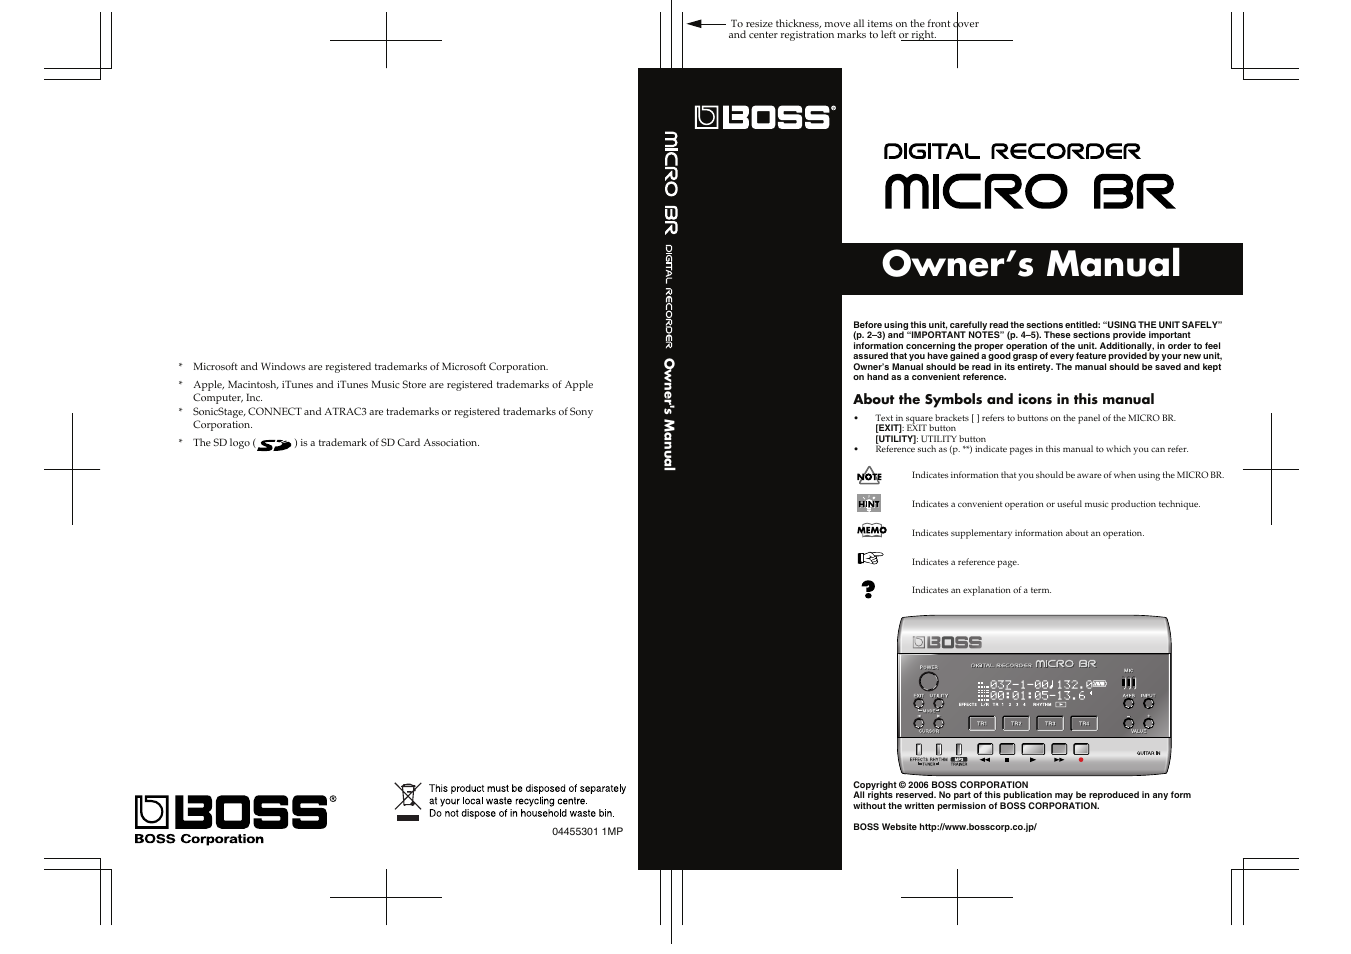 Roland Boss Digital Recorder Micro Br User Manual 132 Pages